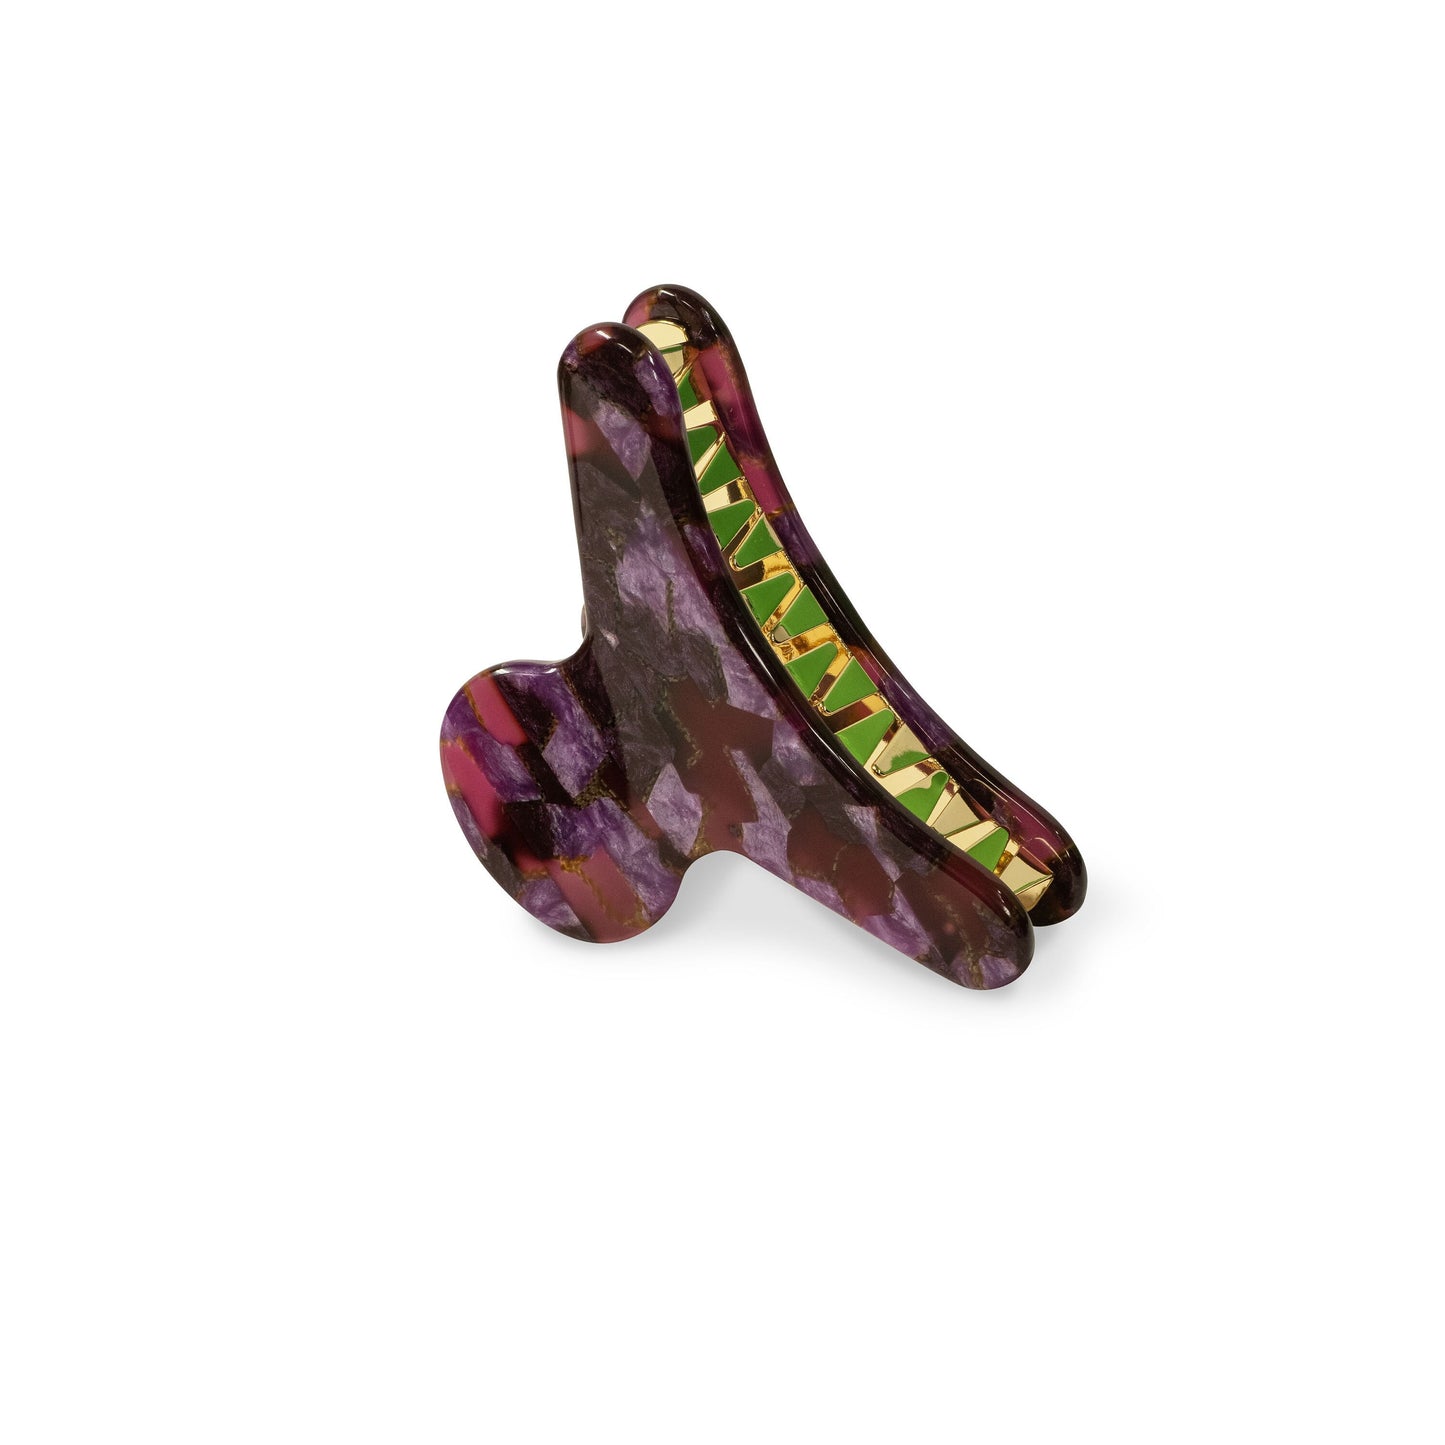 French Claw in Violet | Purple Gem Cellulose Acetate Resin Stainless Steel Teeth